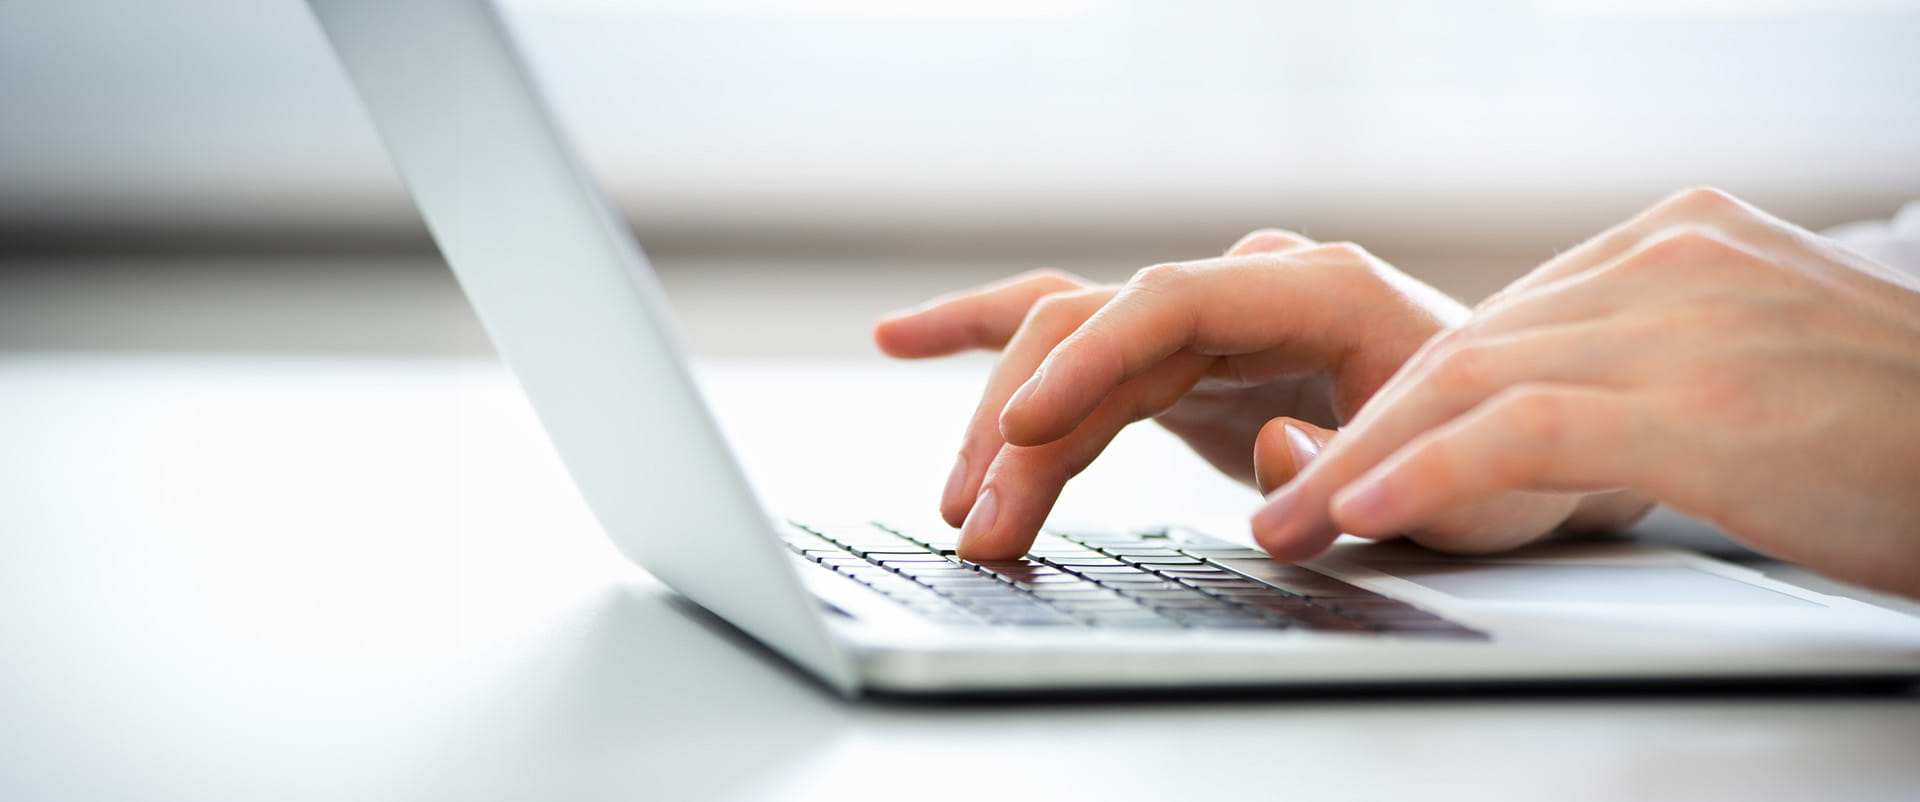 Pair of hands poised over a laptop keyboard 